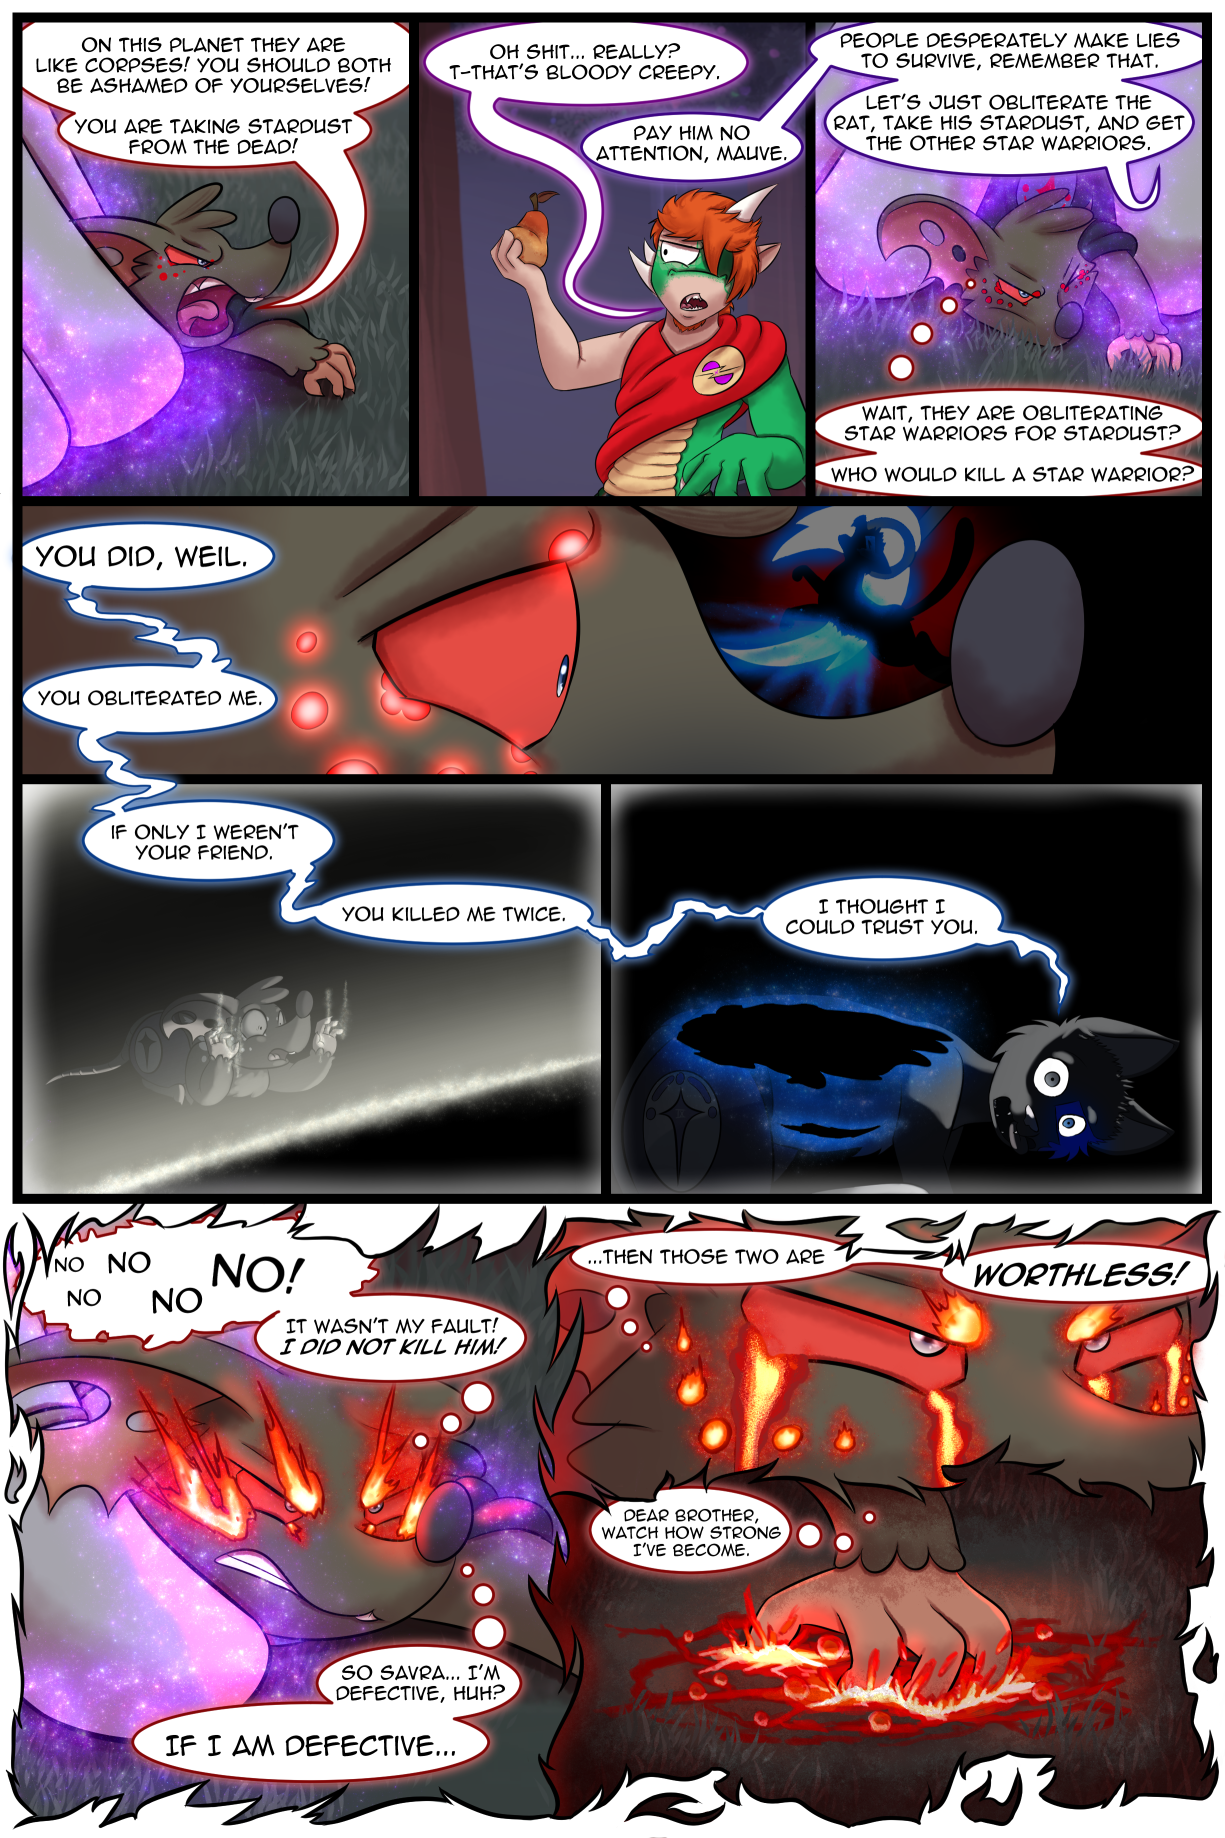 Ch5 Page 13 – Worthless